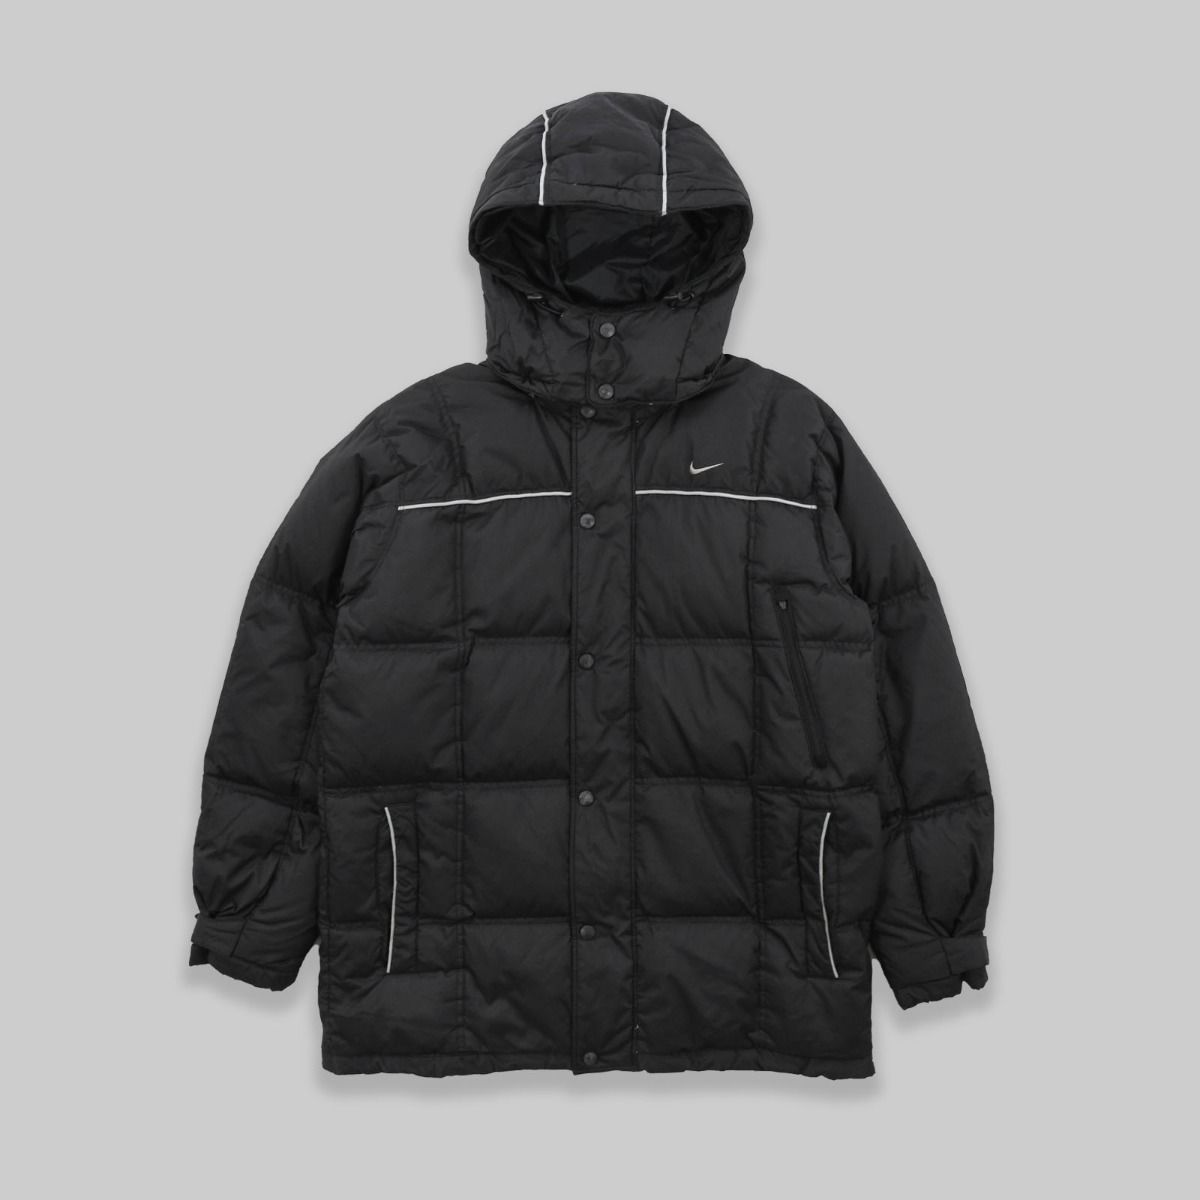 Nike Early 2000s Down Puffer Jacket